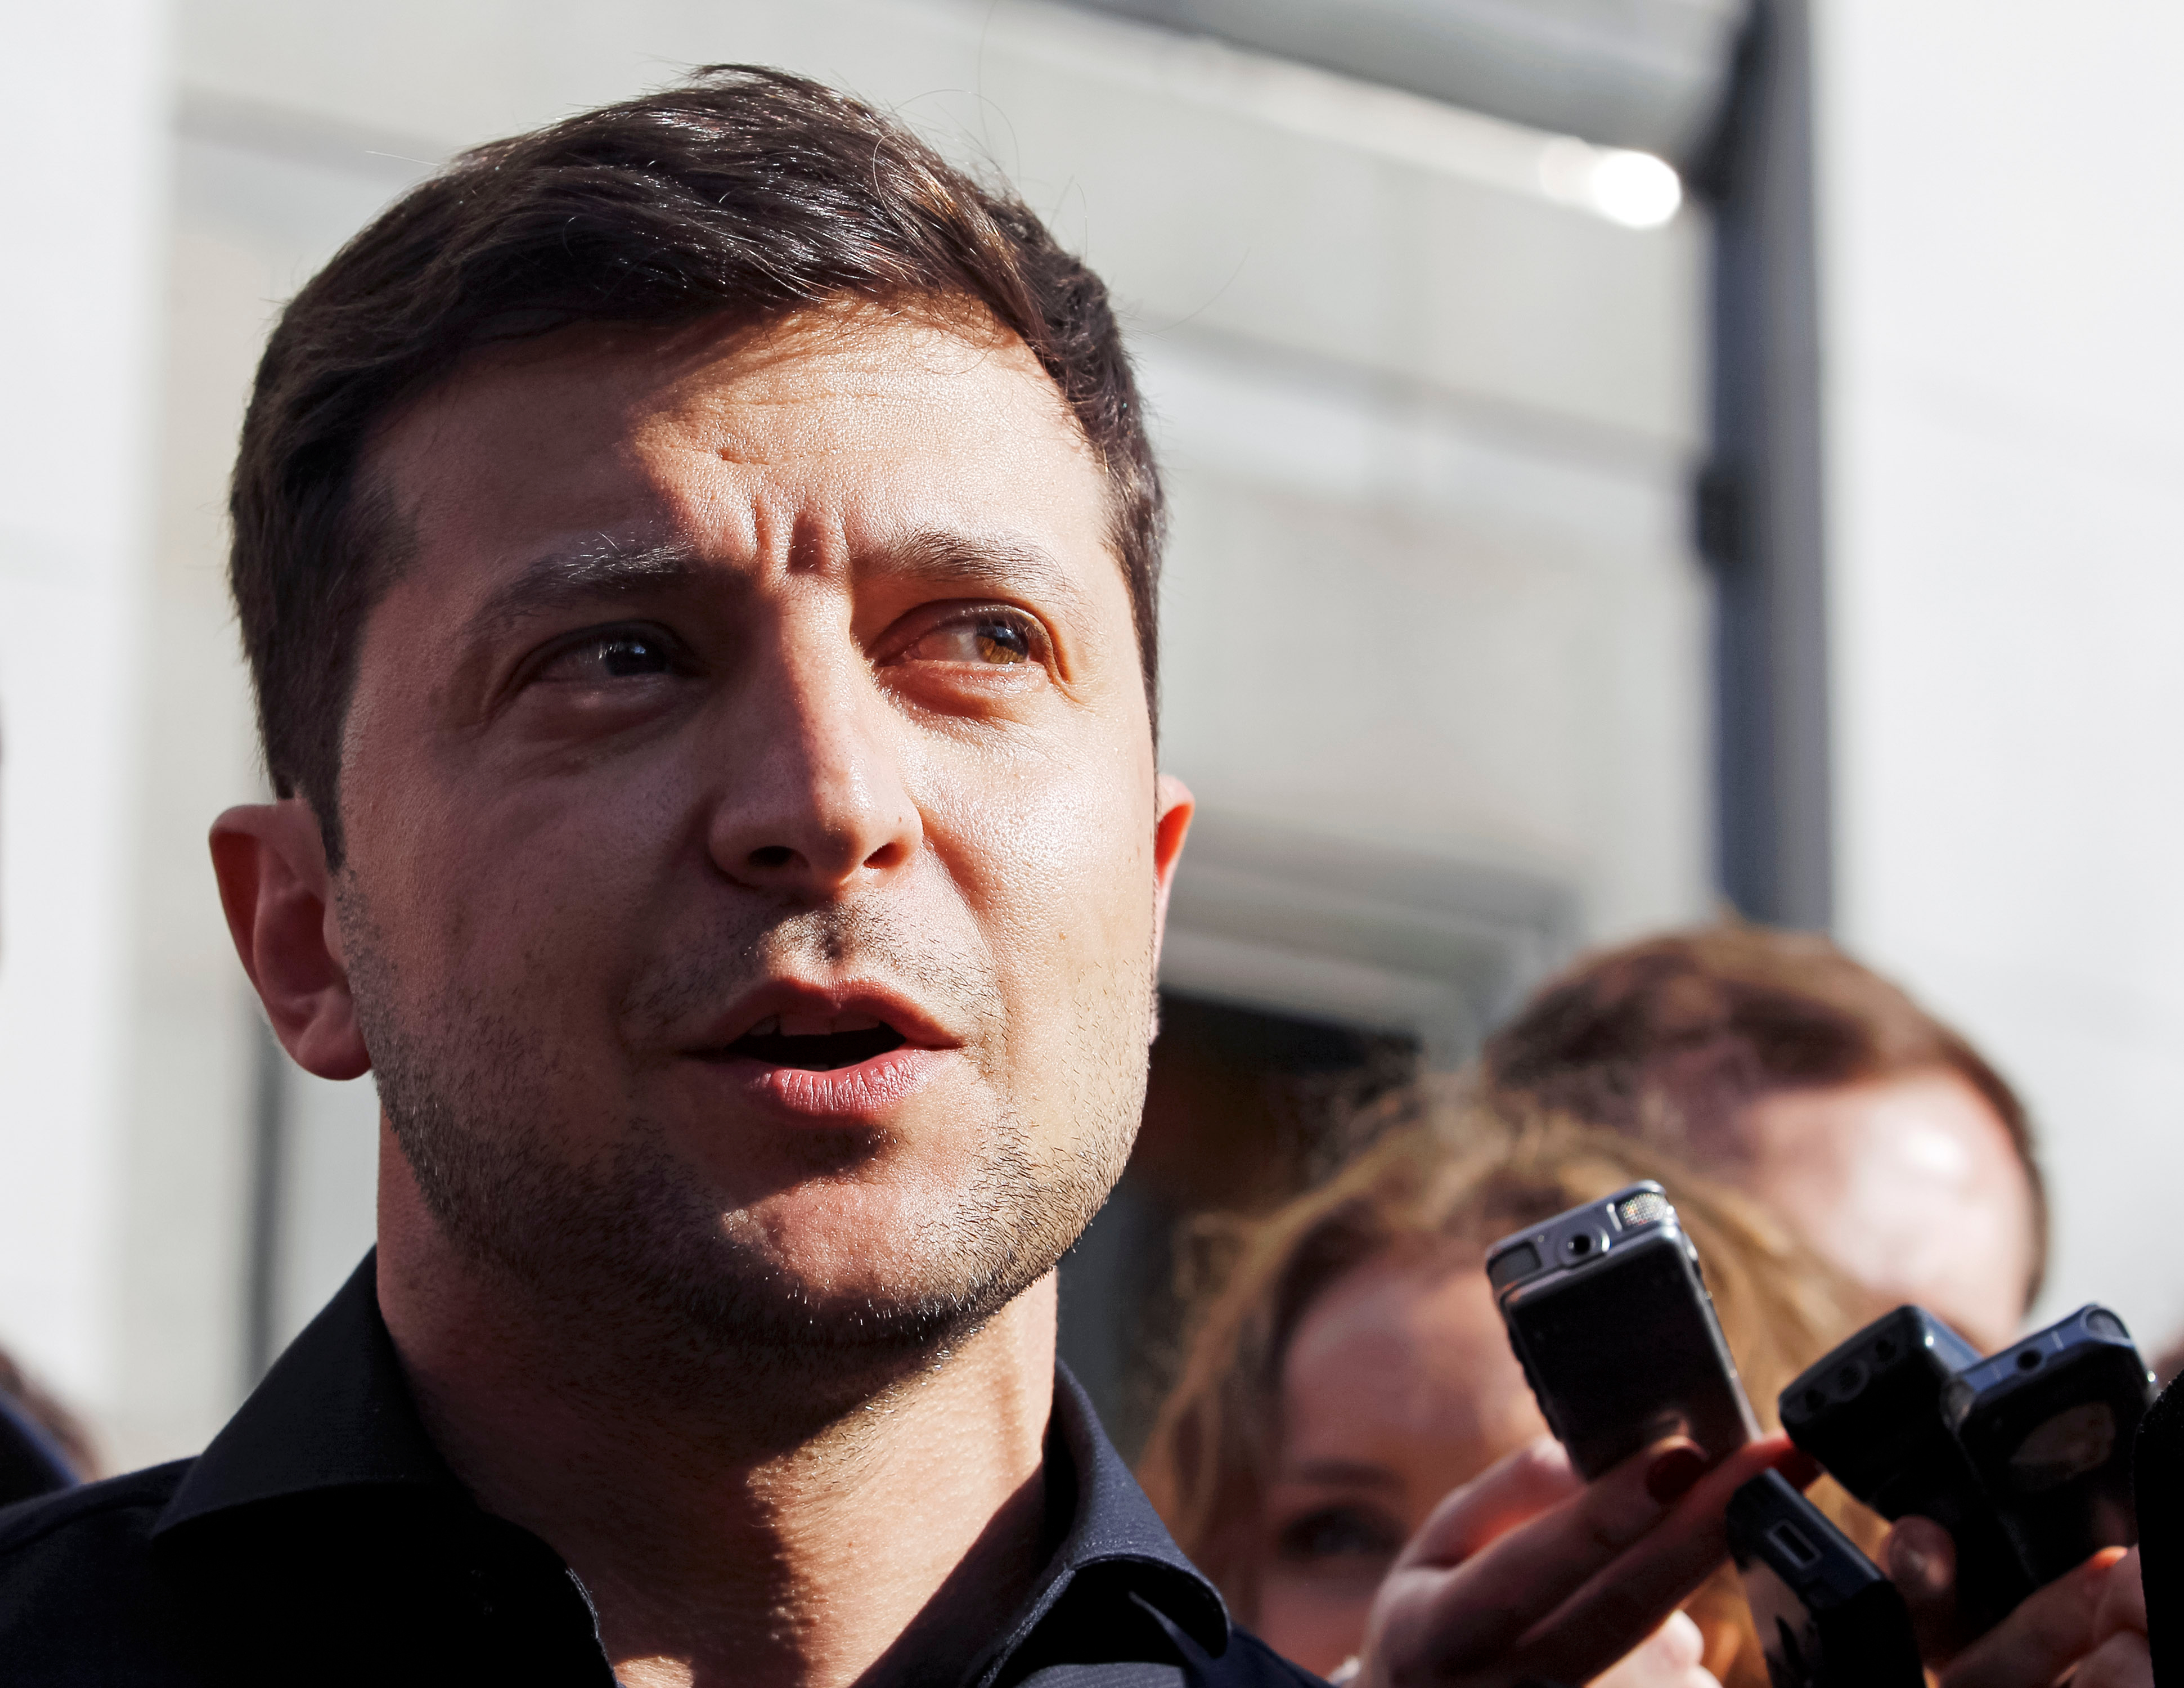 Newly elected Ukrainian President elect Volodymyr Zelensky speaks to journalists after meeting with leaders of some parliament factions in Kiev, Ukraine, 04 May 2019.